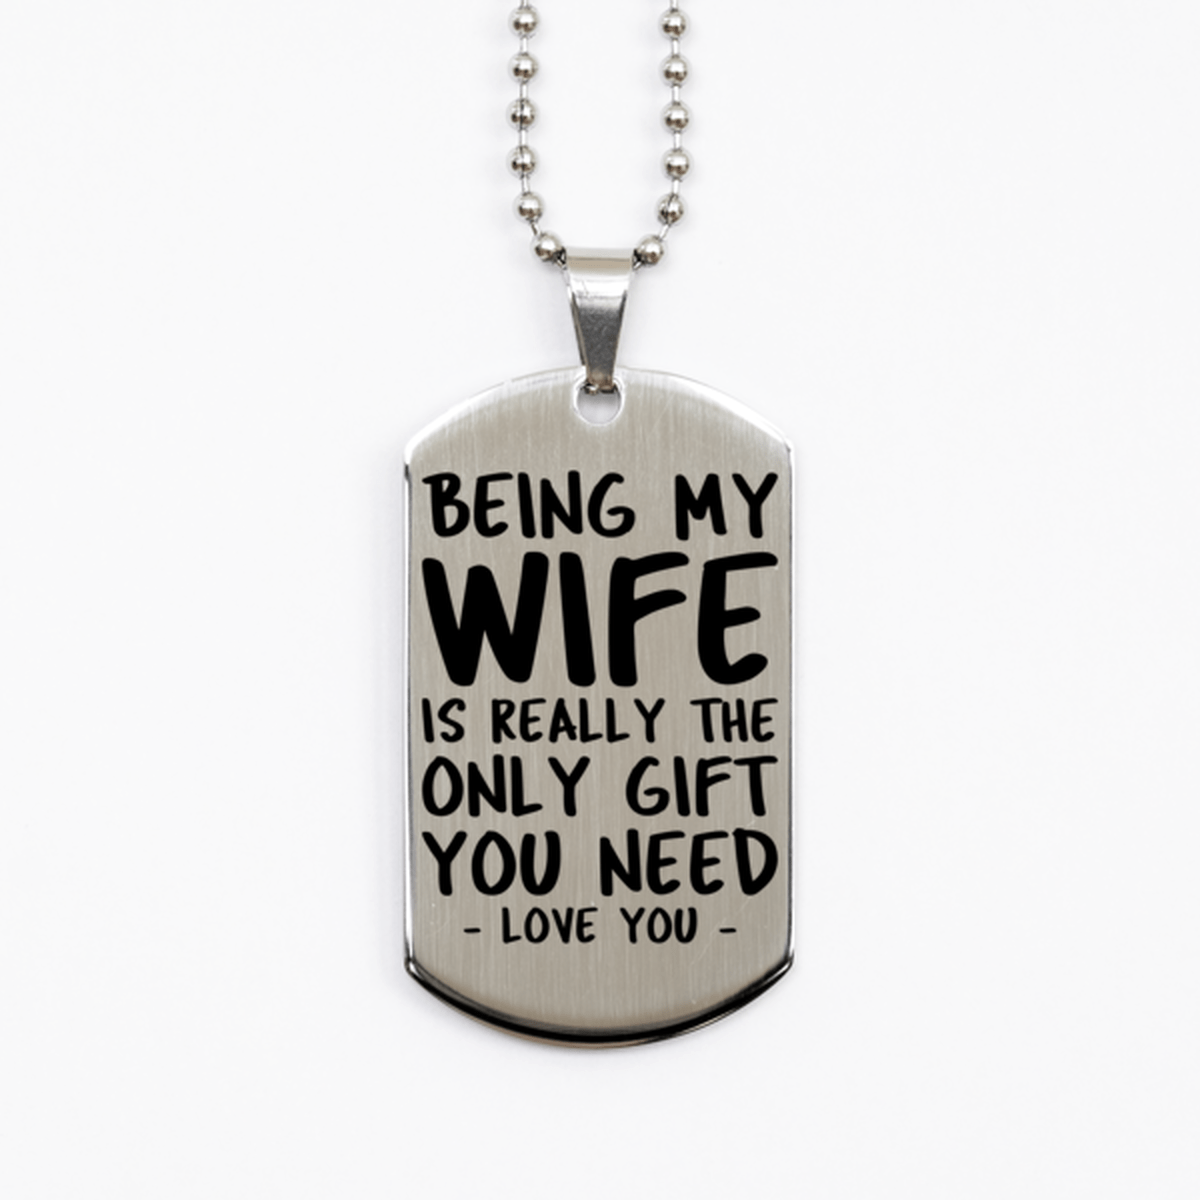 Funny Wife Silver Dog Tag Necklace, Being My Wife Is Really the Only Gift You Need, Best Birthday Gifts for Wife